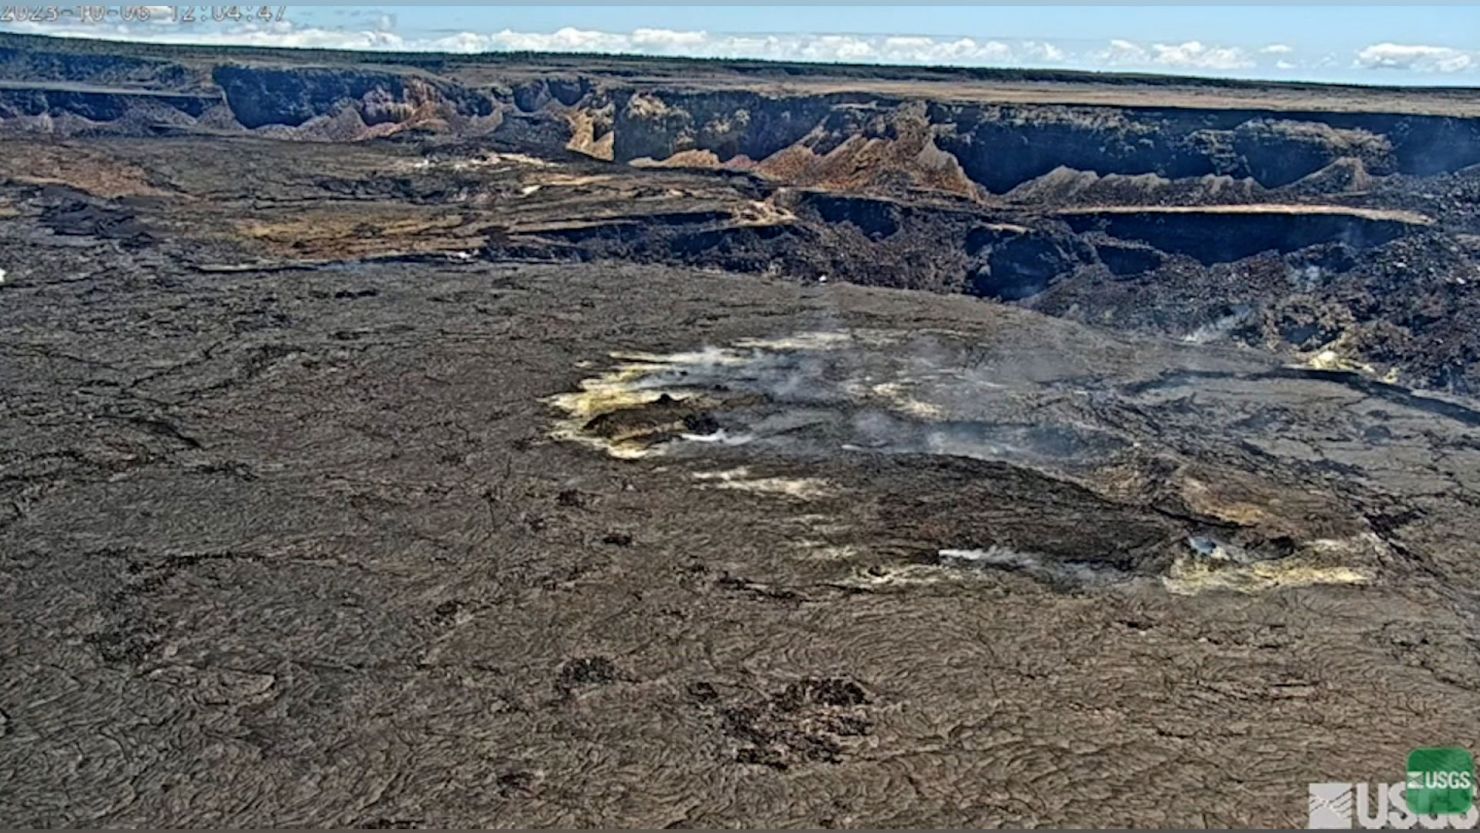 An October 6 still from a US Geological Survey livestream shows the Halemaʻumaʻu crater at the summit of Kīlauea.